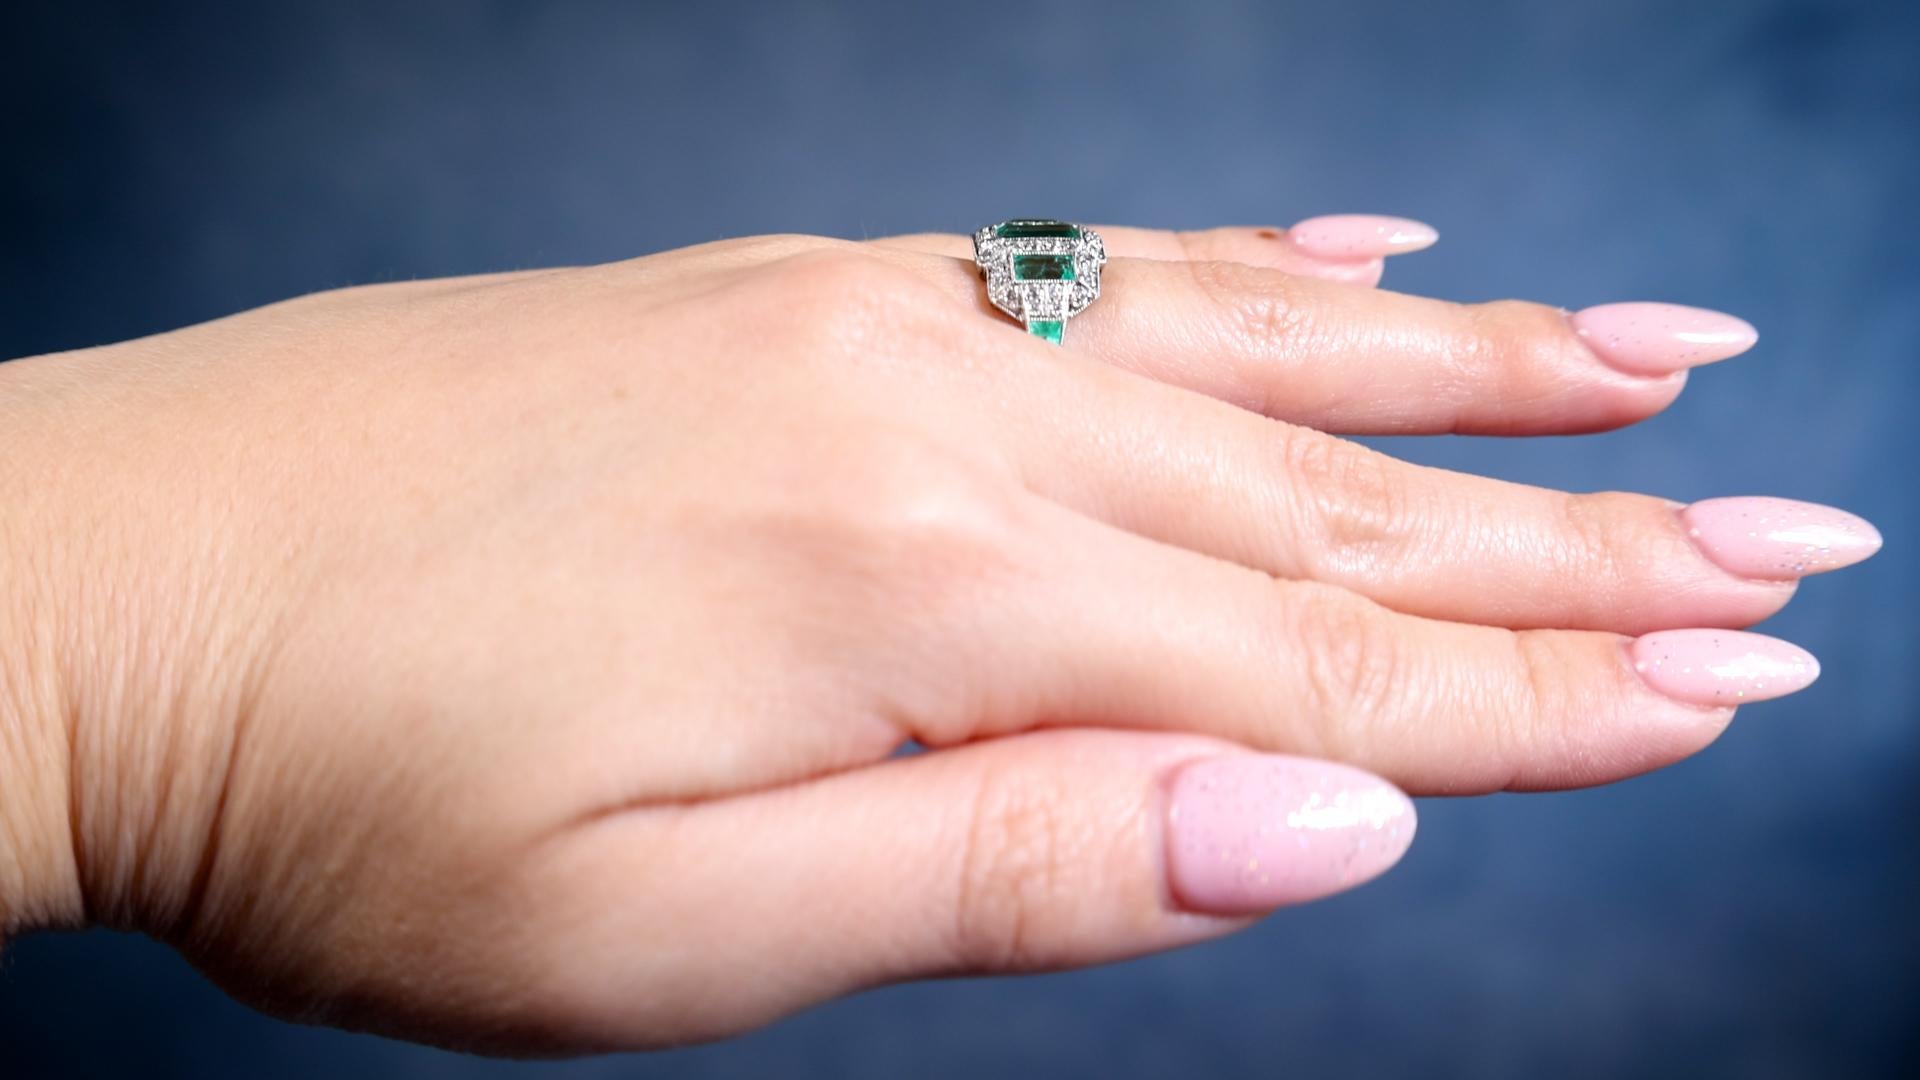 Art Deco Inspired Emerald Diamond Platinum Ring In Excellent Condition For Sale In Beverly Hills, CA